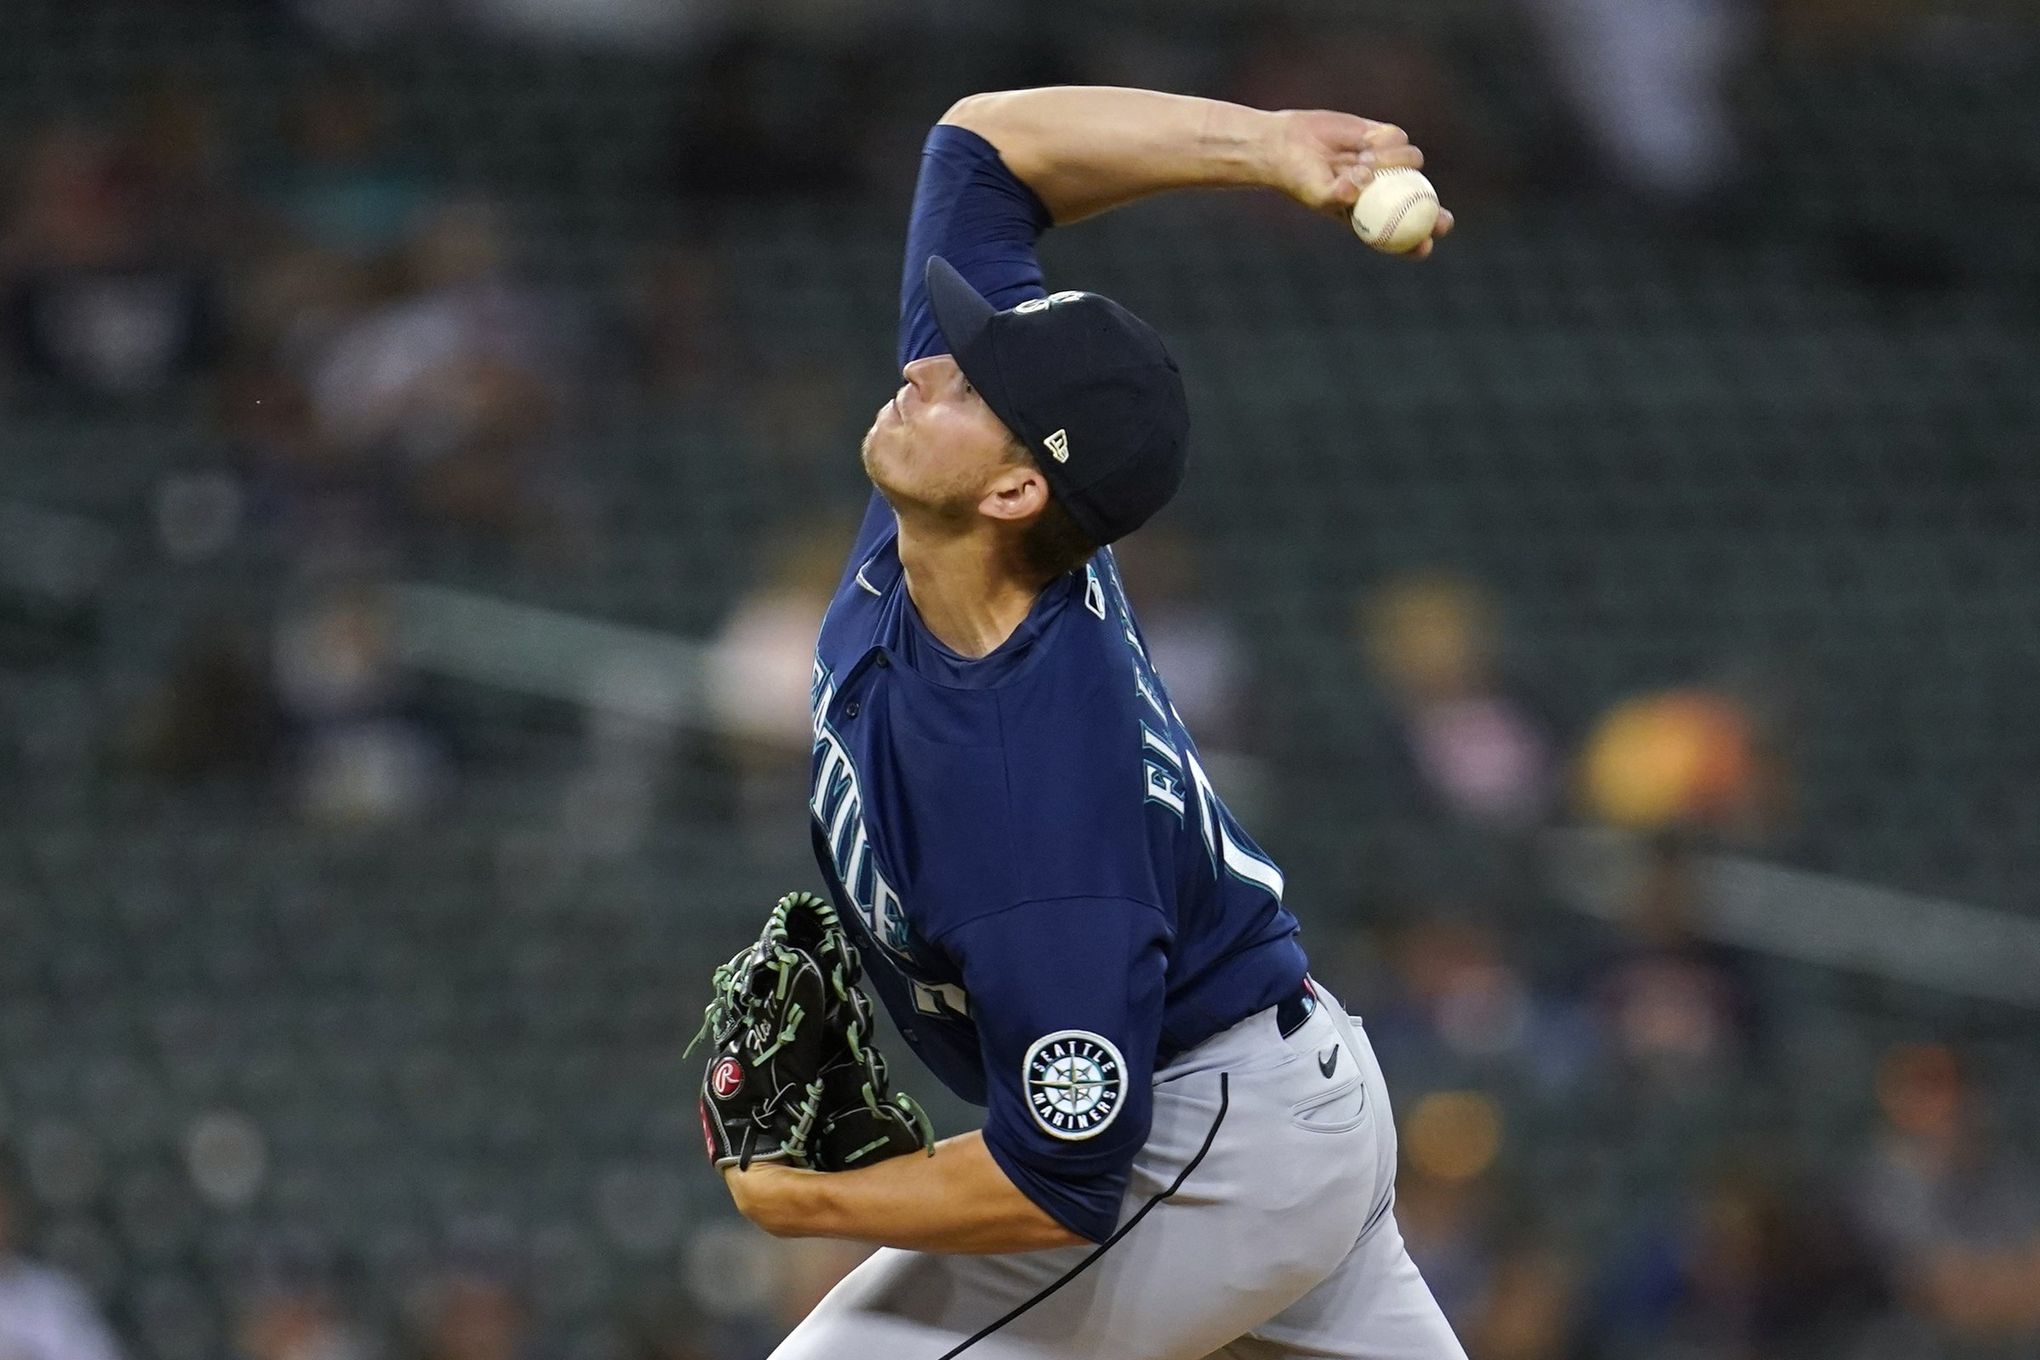 Mariners' Chris Flexen needed one out against Tigers to guarantee